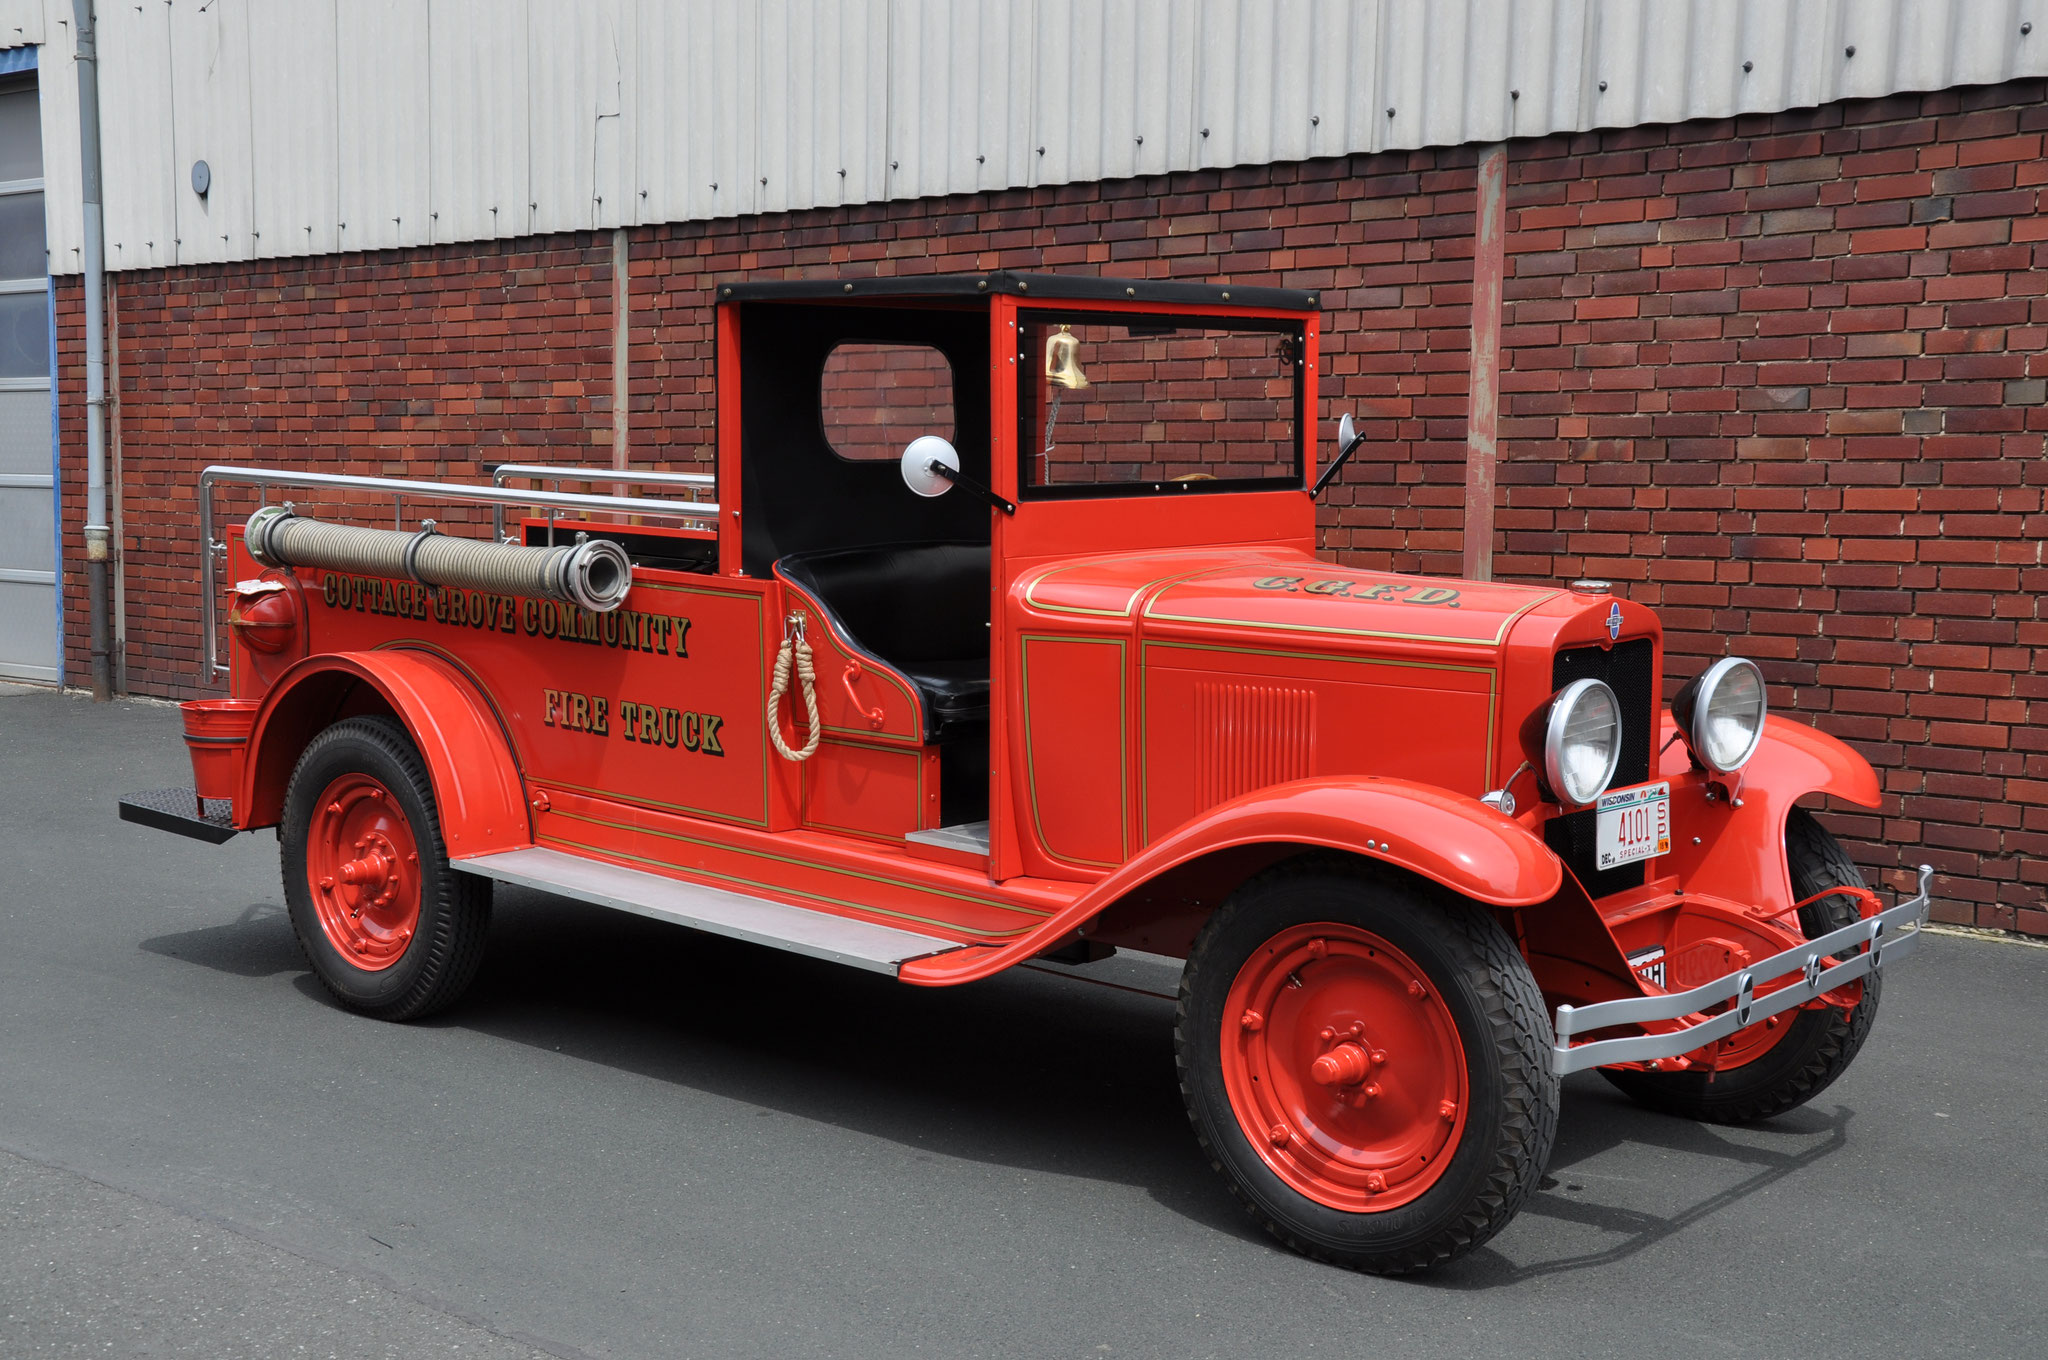 Chevrolet International Fire Truck, constructed in 1929, 3200 ccm, 6 cylinders - Germany